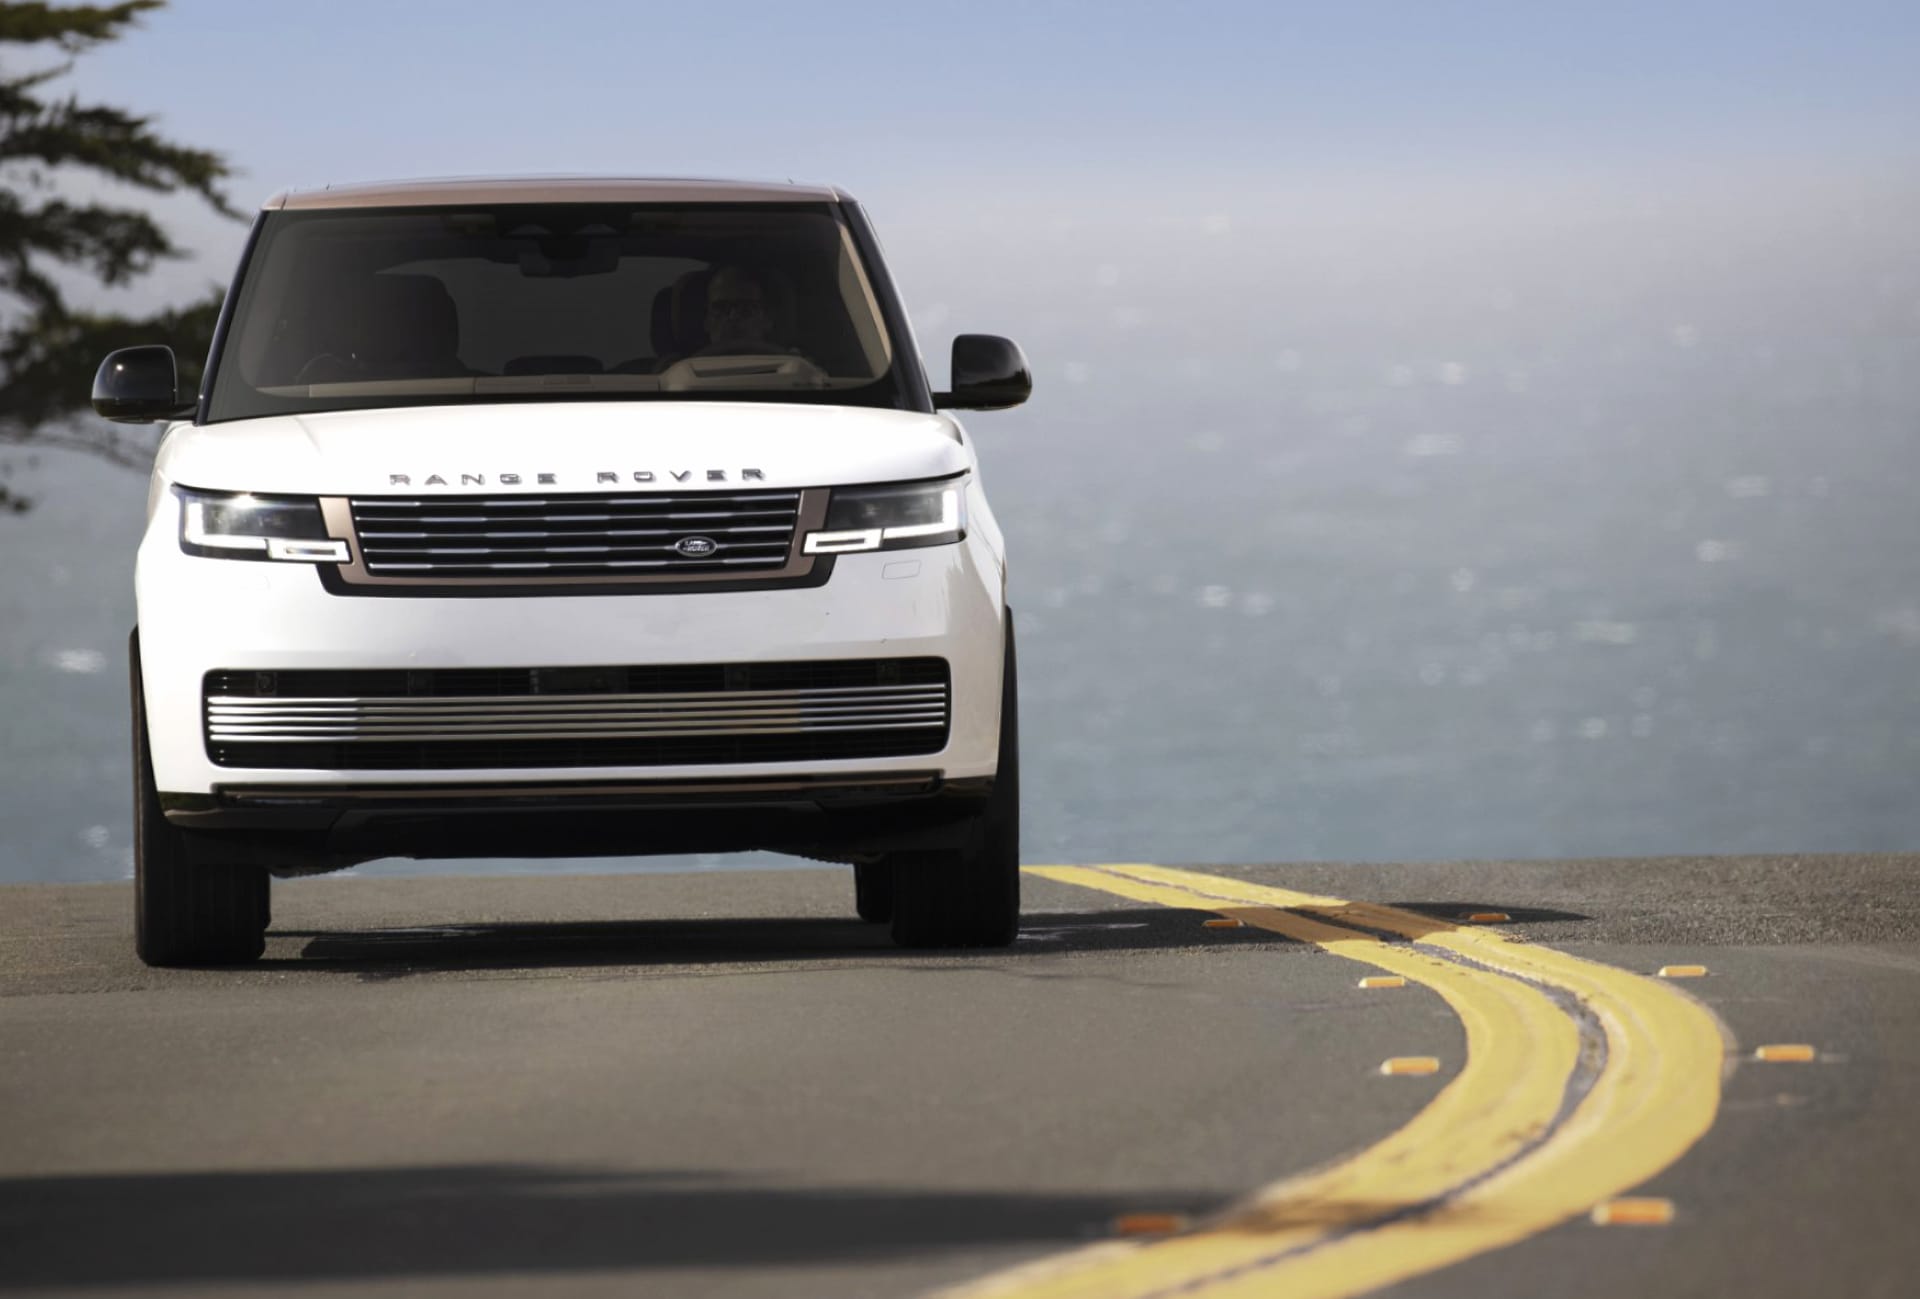 Range Rover SV wallpapers HD quality